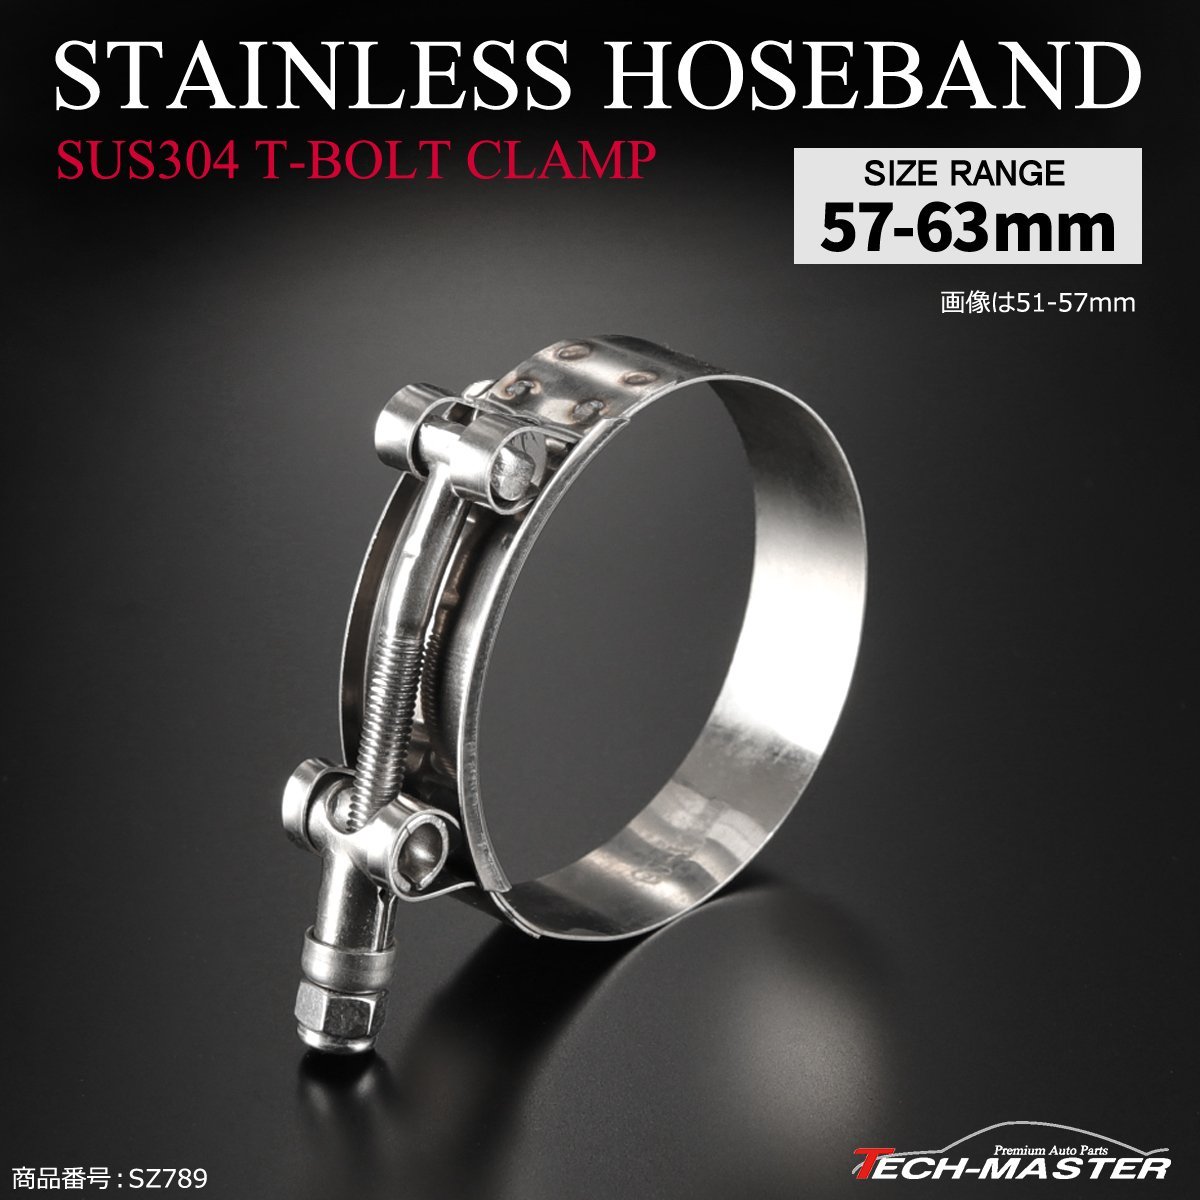  all-purpose stainless steel hose band T bolt clamp Flat SUS304 57~63mm width 19mm silver color 1 piece SZ789